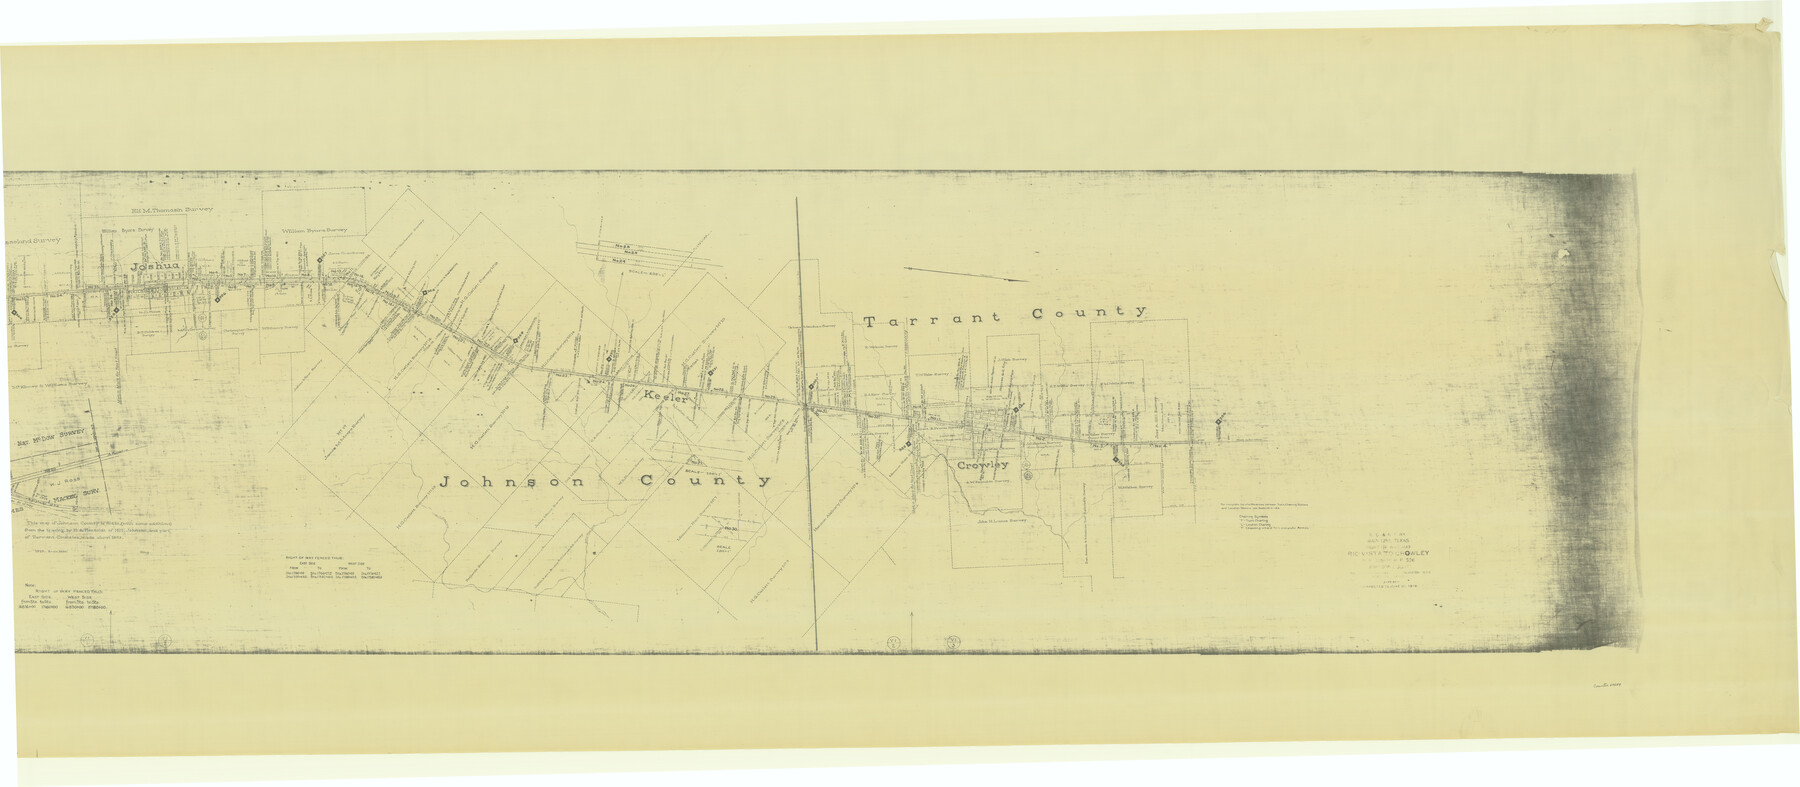 64654, G. C. & S. F., Main Line, Texas, Right of Way map, Rio Vista to Crowley, General Map Collection